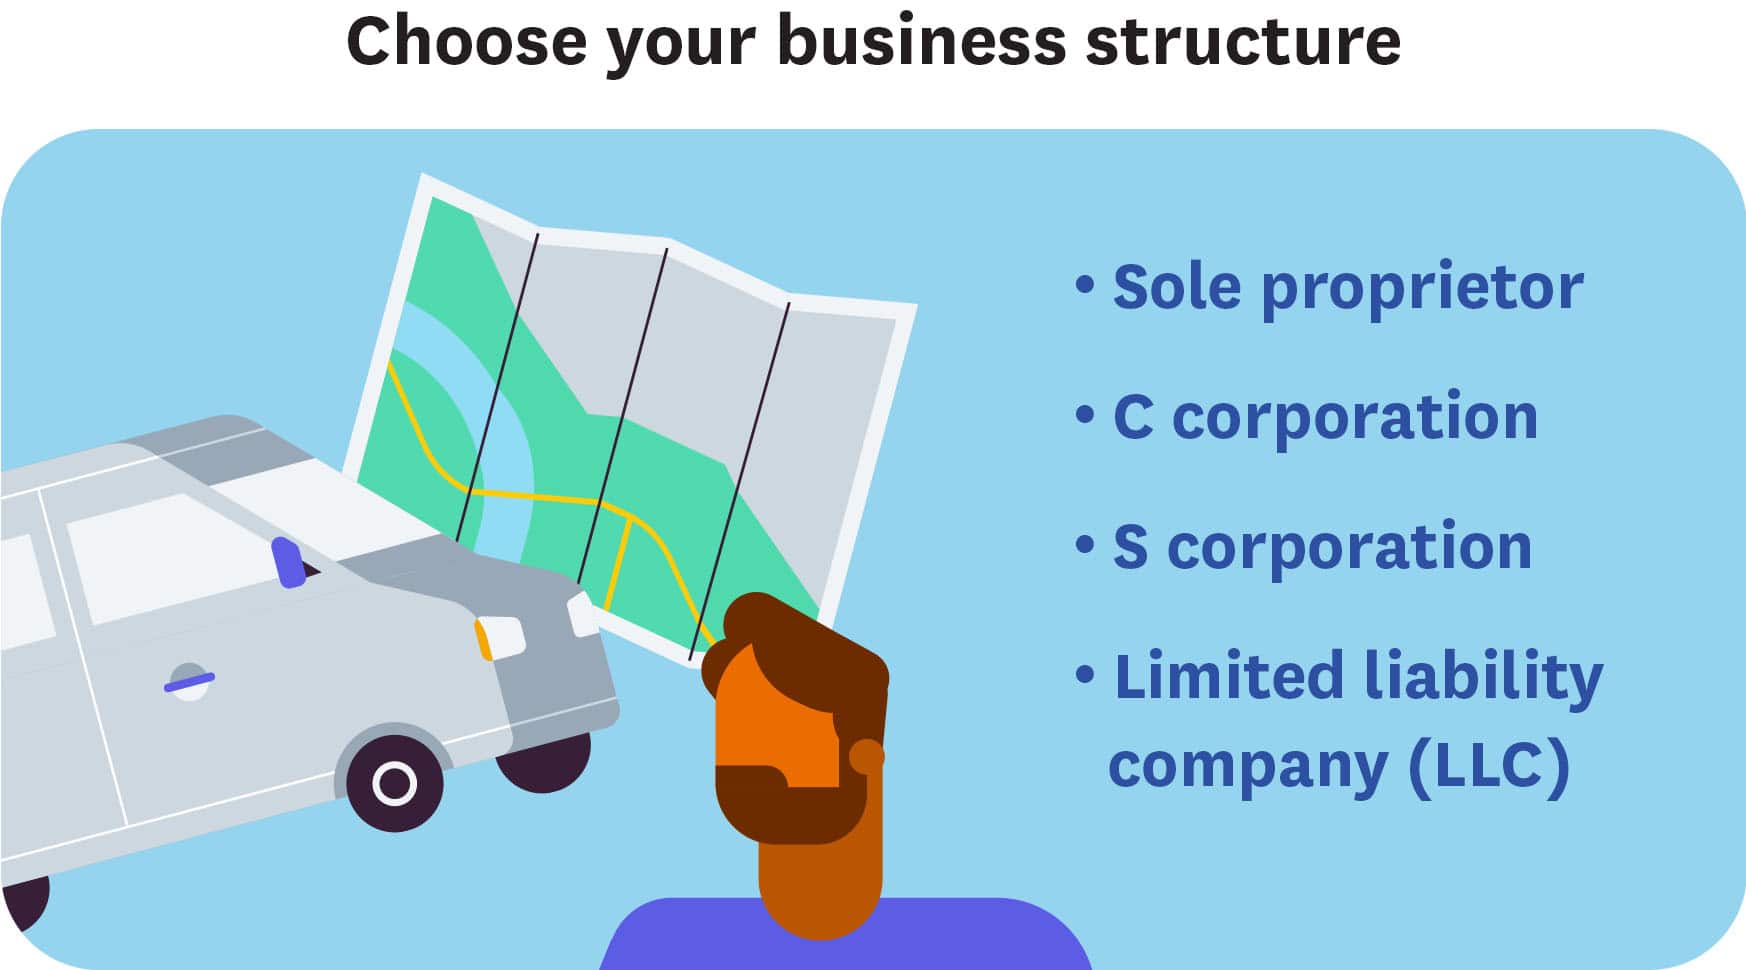 The four types of business structures include sole proprietor, C or S corporation, or LLC